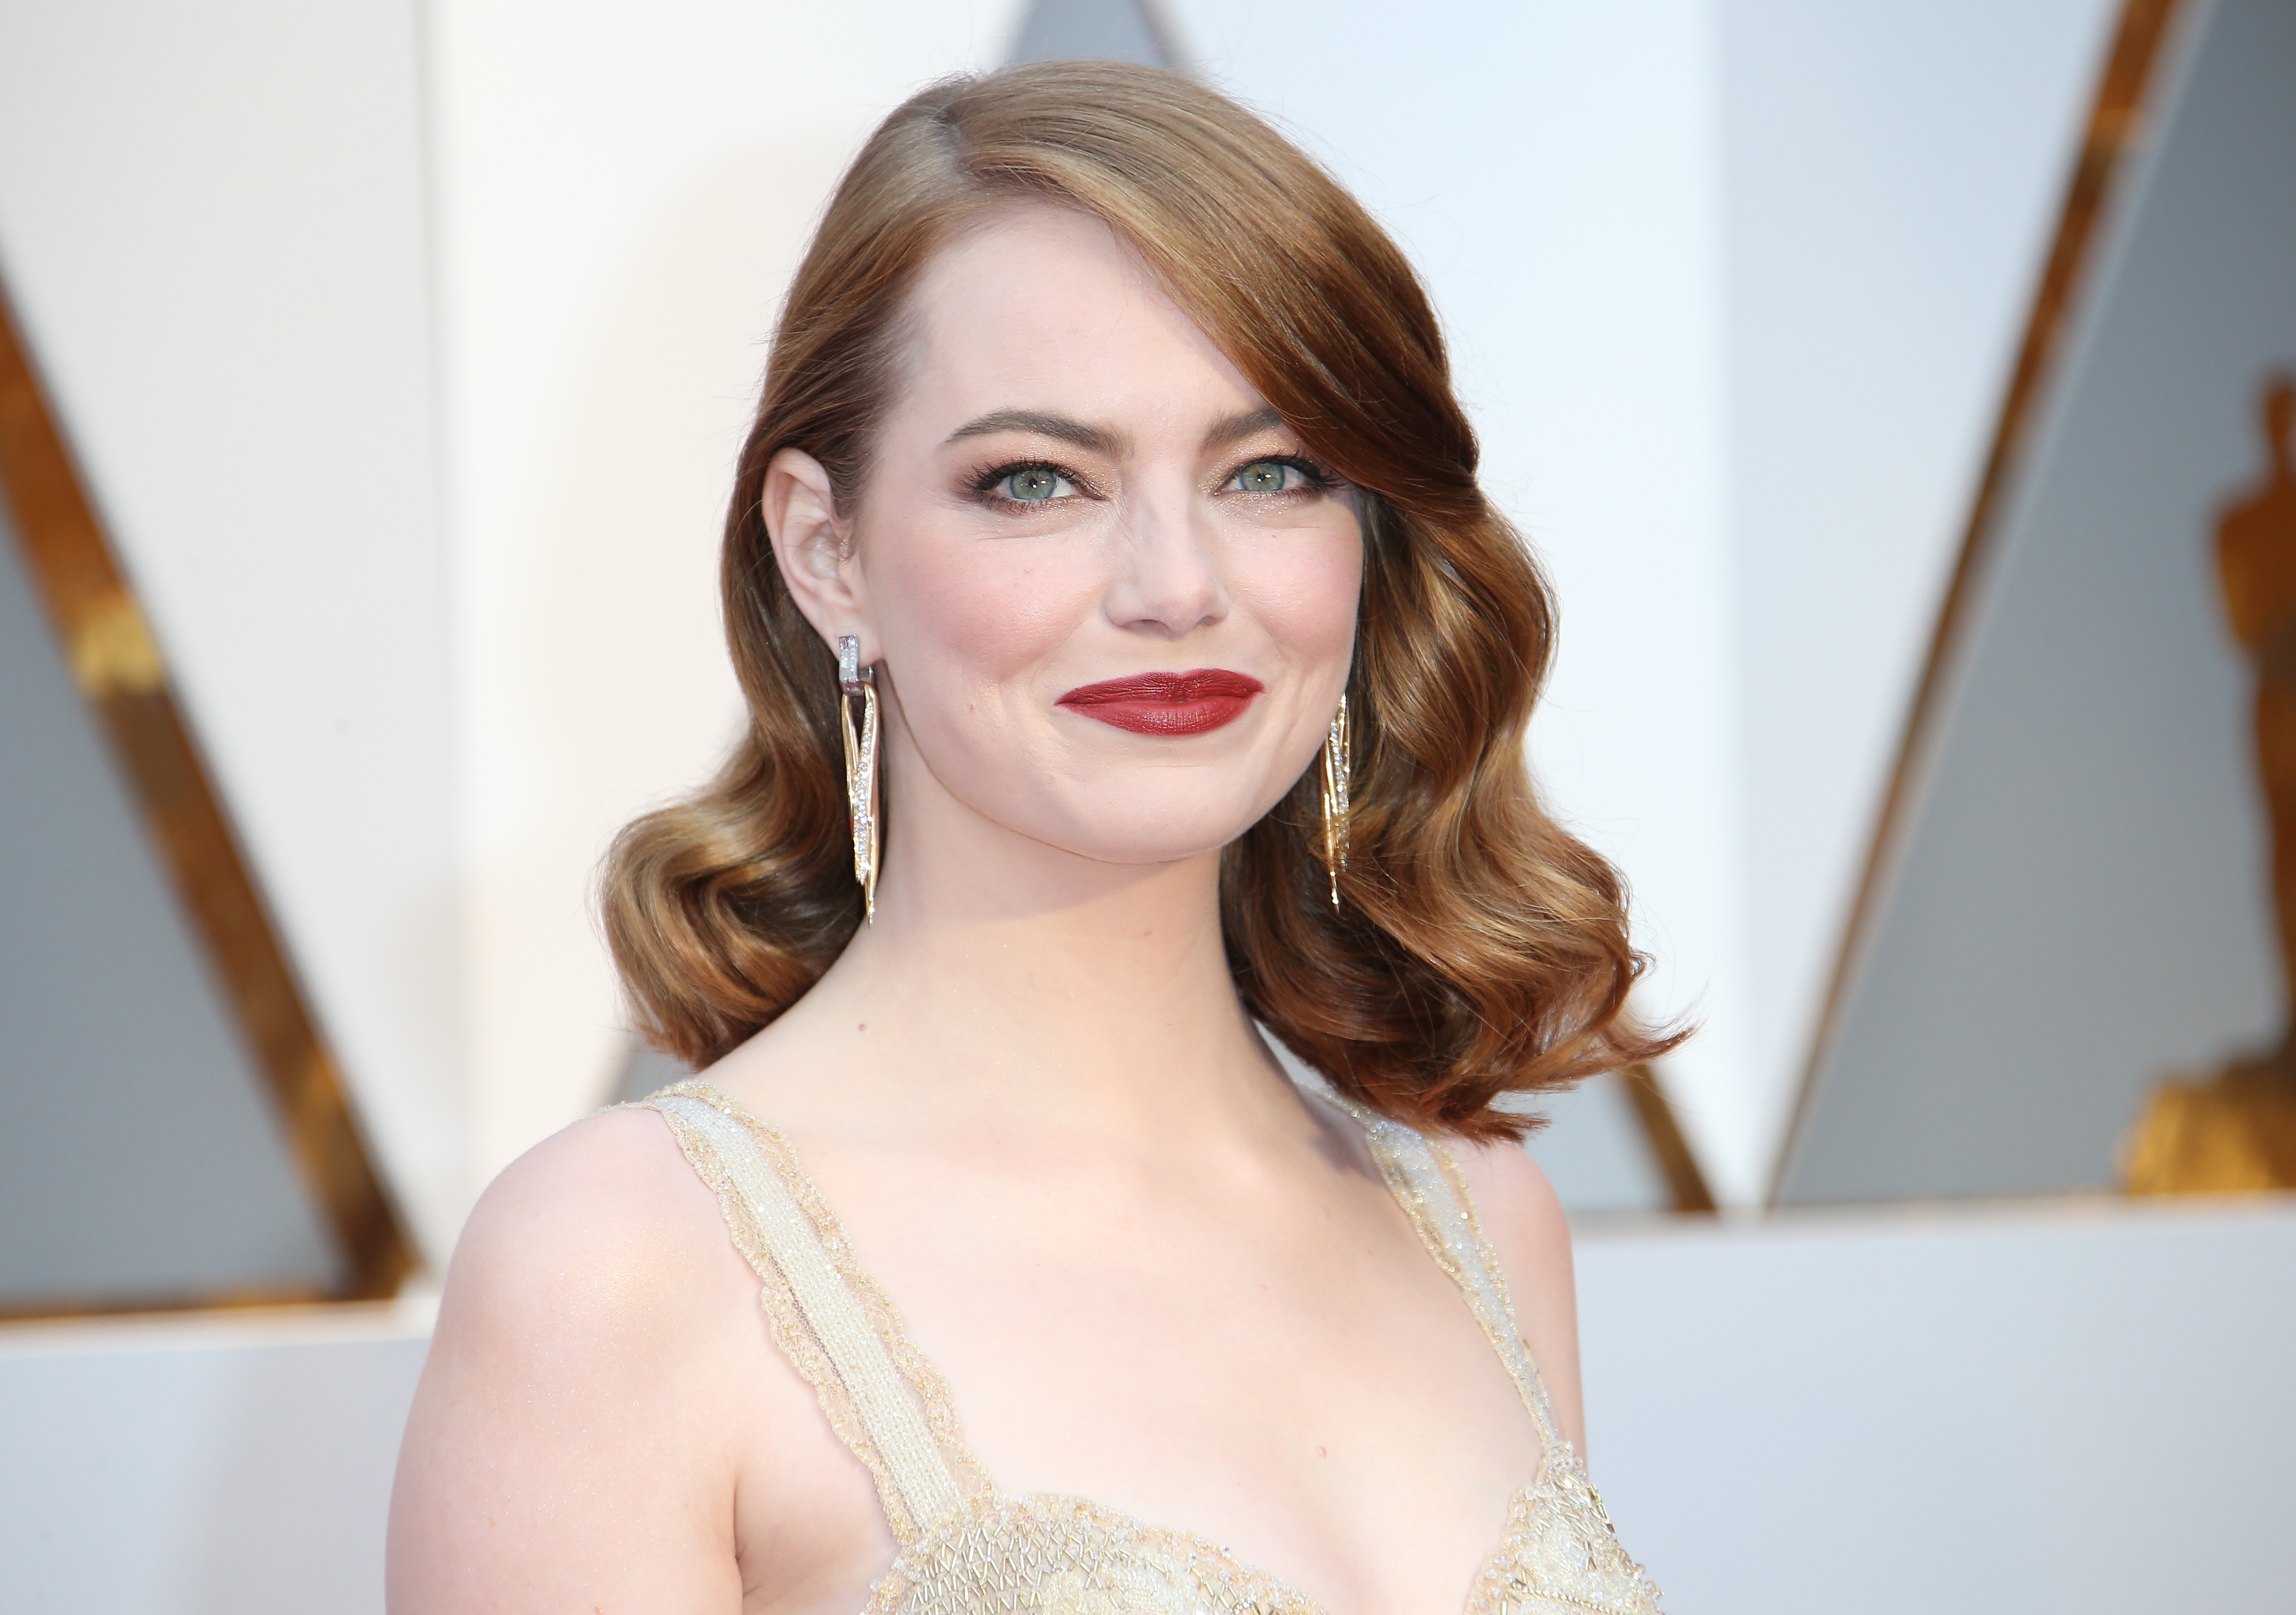 HOLLYWOOD, CA - FEBRUARY 26: Actress Emma Stone arrives at the 89th Annual Academy Awards at Hollywood &amp; Highland Center on February 26, 2017 in Hollywood, California. (Photo by Dan MacMedan/Getty Images) (Dan MacMedan—Getty Images)